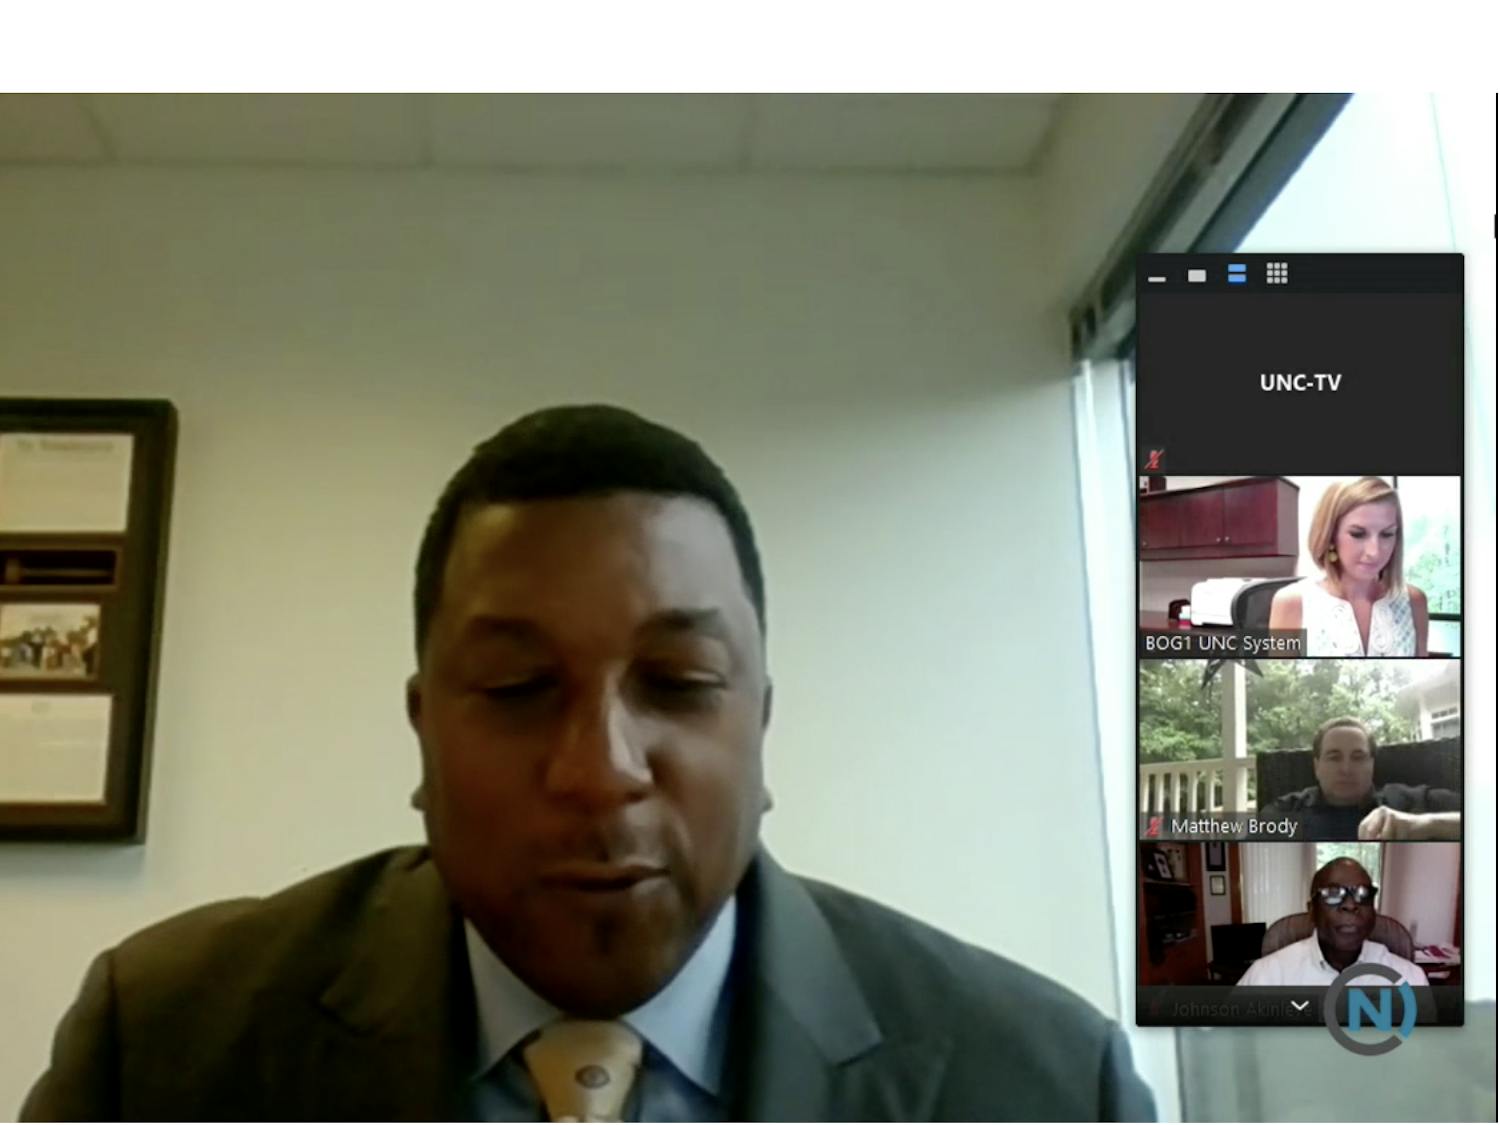 Darrell Allison speaks via Zoom livestream at the Historically Minority-Serving Institutions (HMSI) Committee Meeting on Thursday, June 6, 2020.